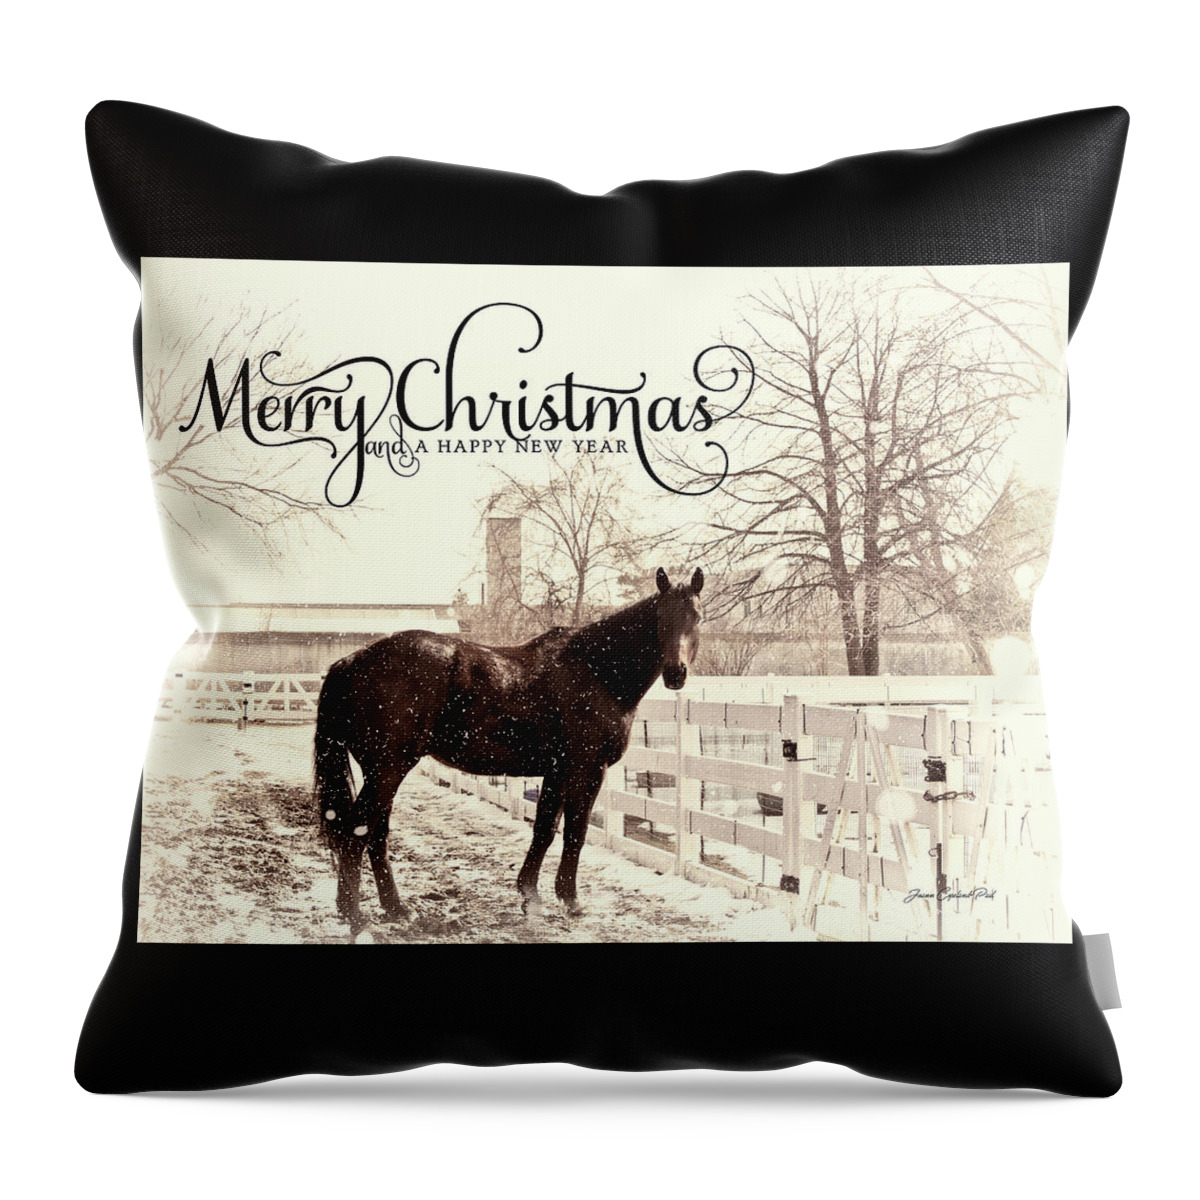 Merry Christmas Throw Pillow featuring the photograph Vintage Merry Christmas with Horse by Joann Copeland-Paul